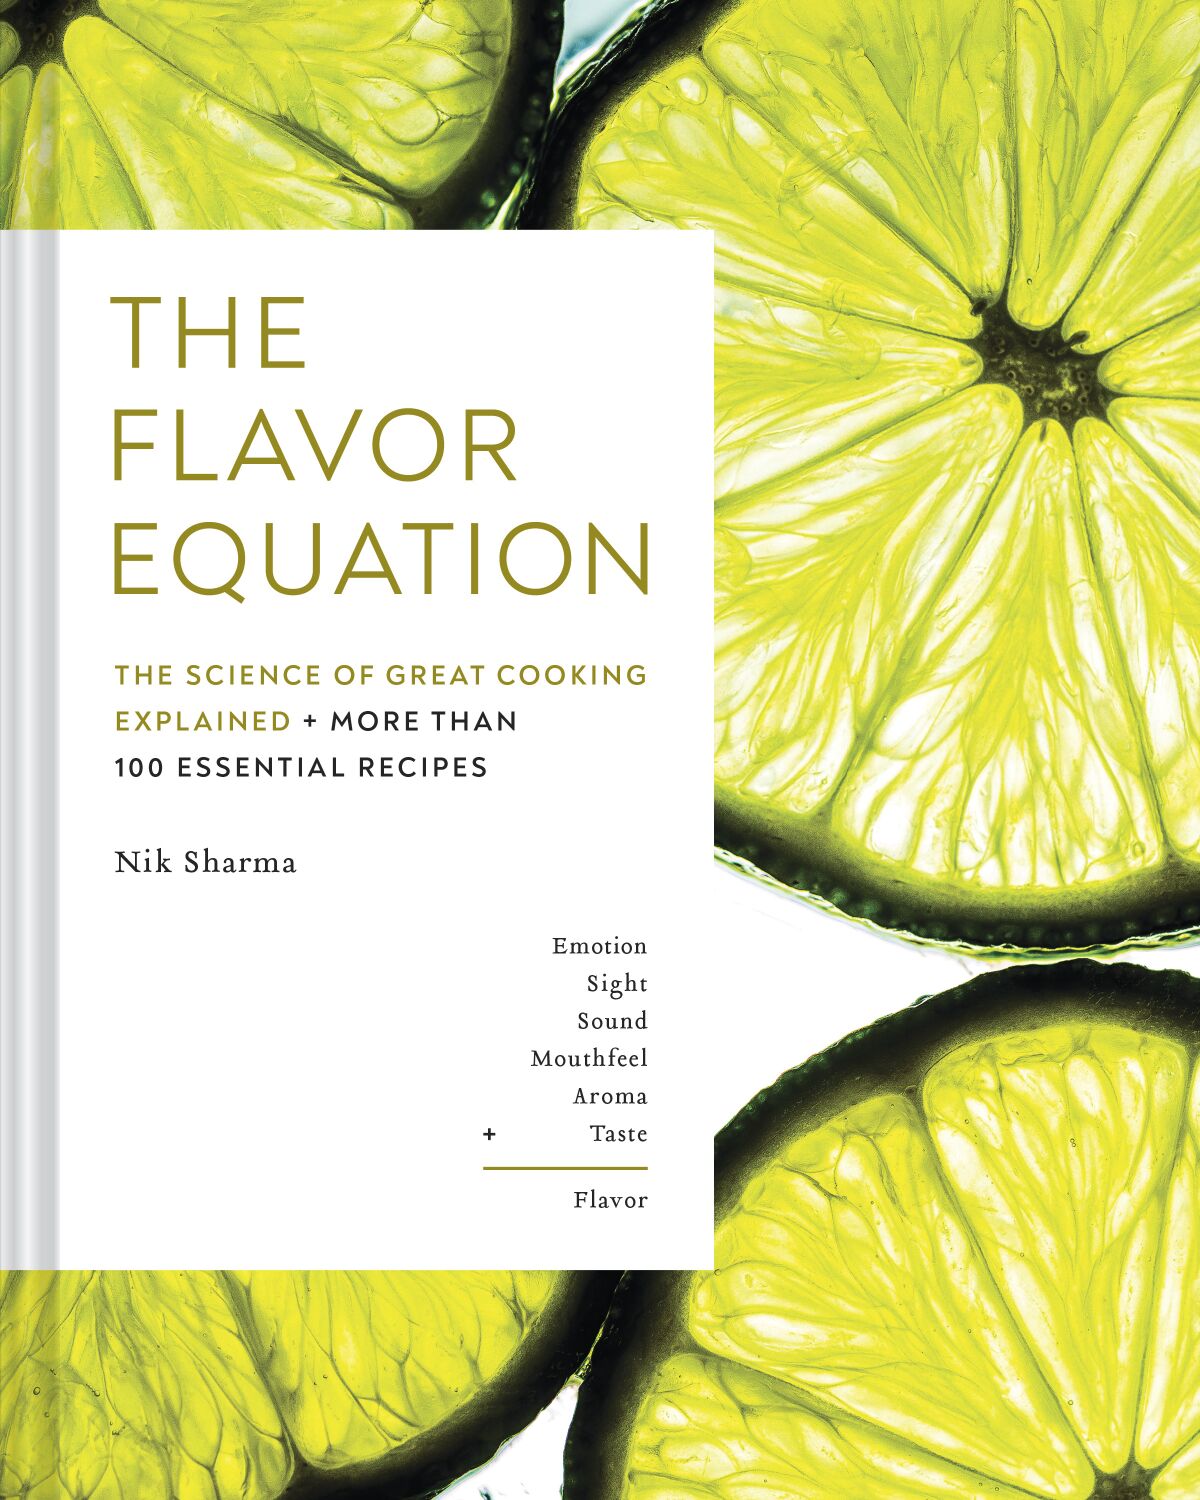 The Flavor Equation: The Science of Great Cooking Explained in More Than 100 Essential Recipes by Nik Sharma